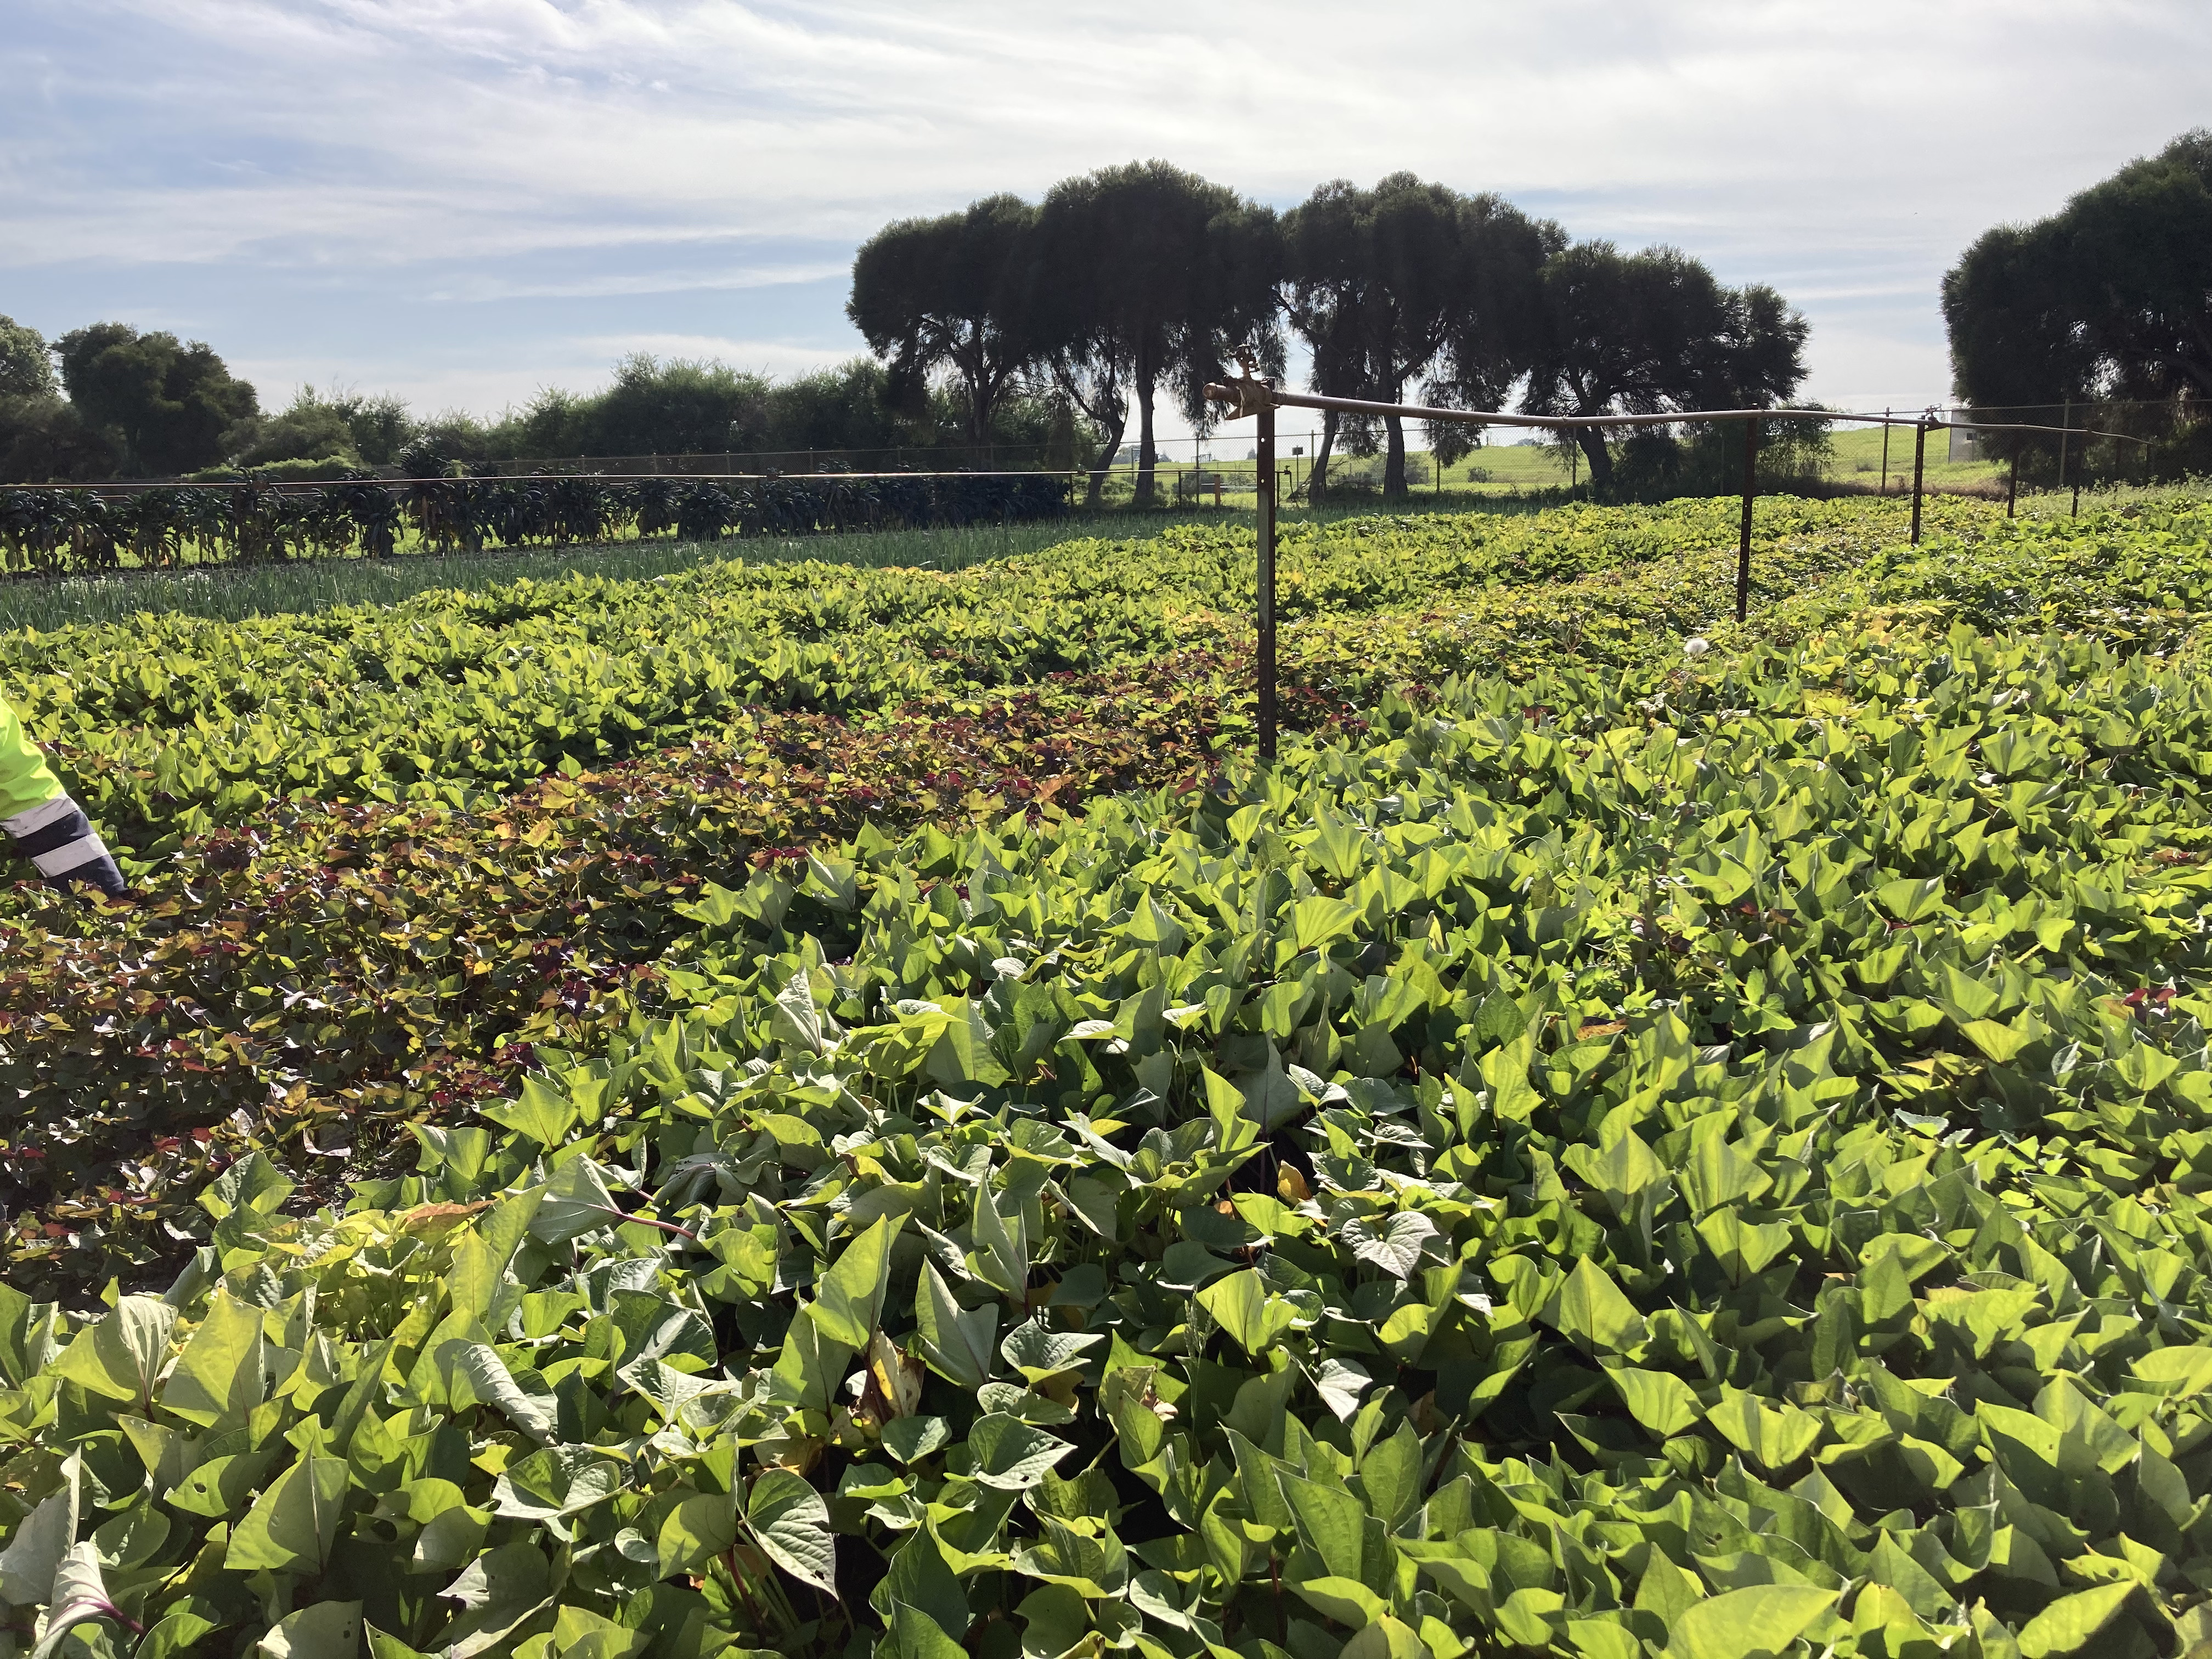 Fare Share Crop Growing at Clayton South